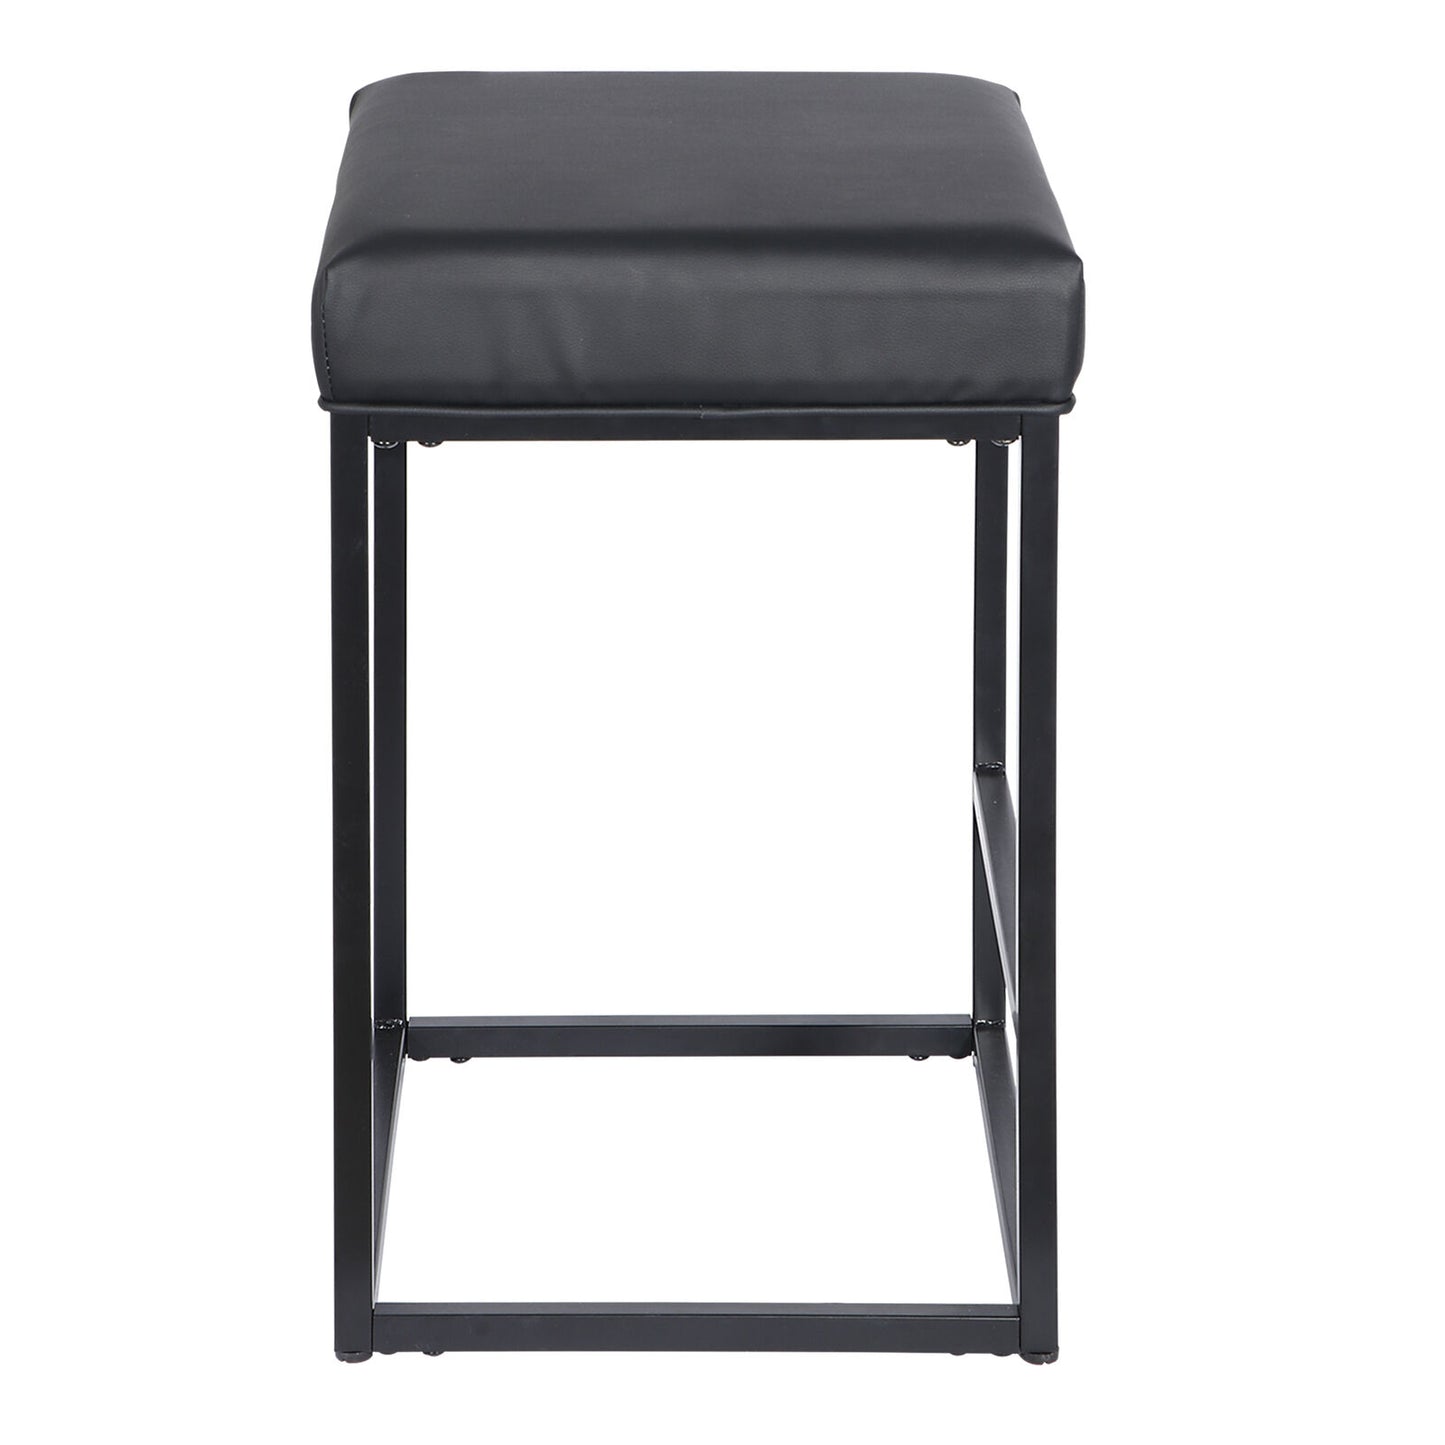 Black Counter Height 24" Bar Stools Set of 2 for Kitchen Counter Backless Modern